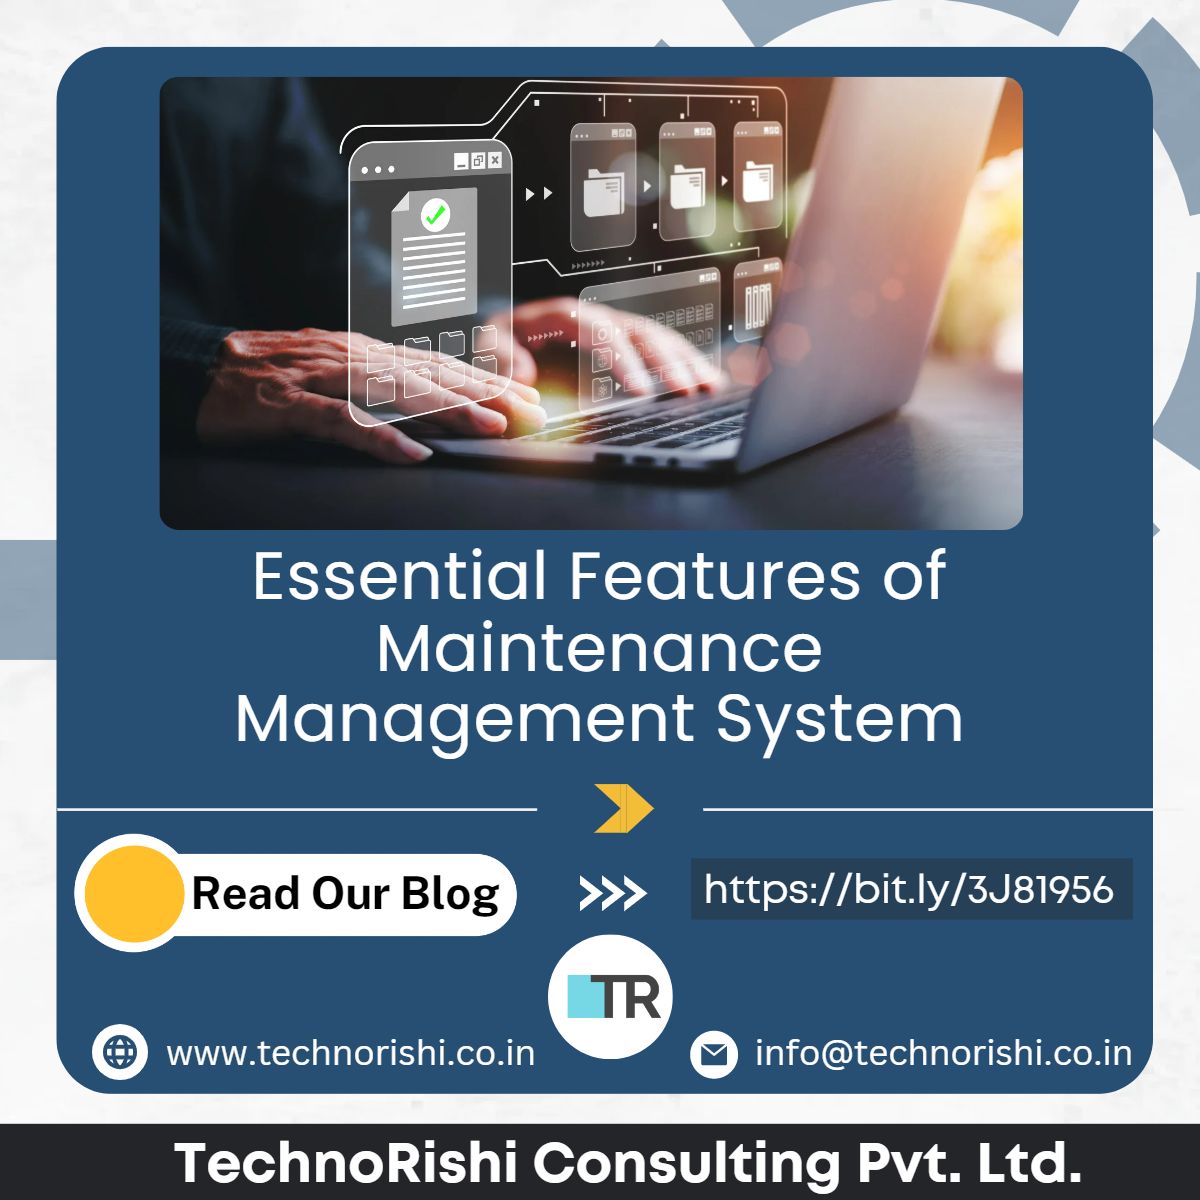 ✅A well-designed MMS acts as a digital powerhouse. It revolutionizes the way Maintenance tasks are planned, executed, and tracked. 

➡️ Read Our Latest Blog Post - bit.ly/3J81956

#facilitymanagement #automatedsolutions s #blogpost  #technorishiconsulting #technorishi